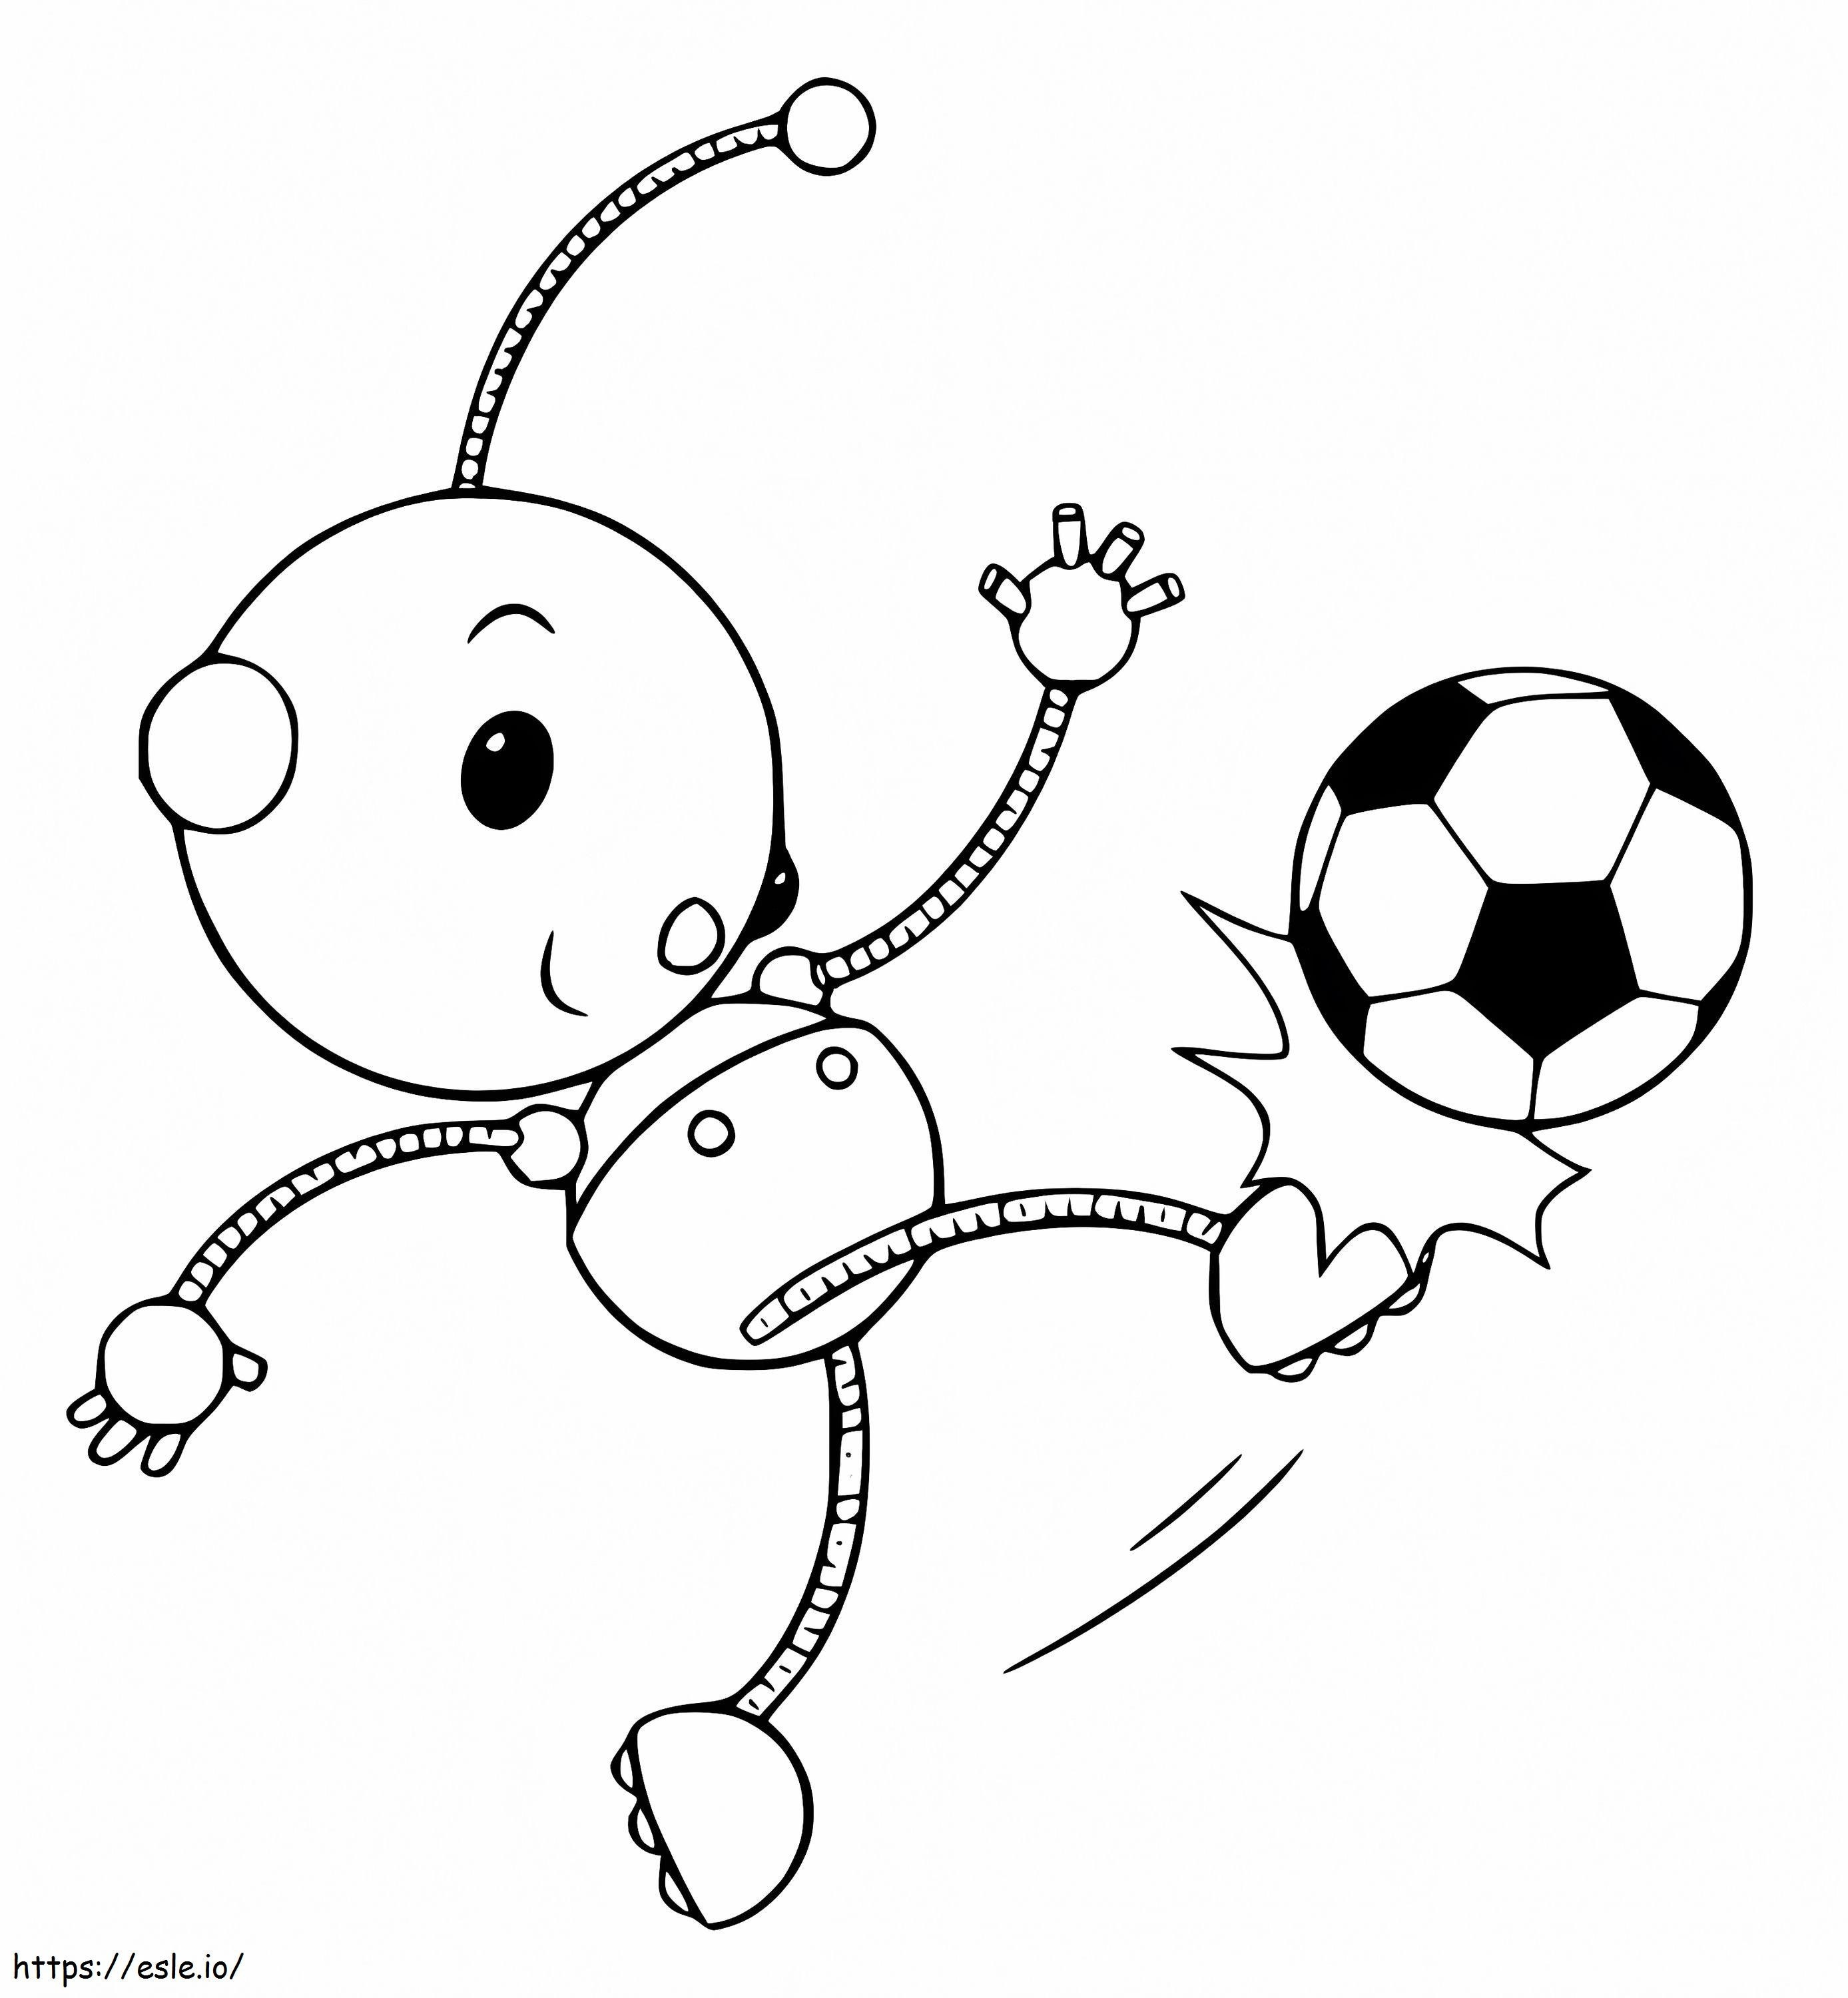 Olie Polie Kicking The Ball coloring page